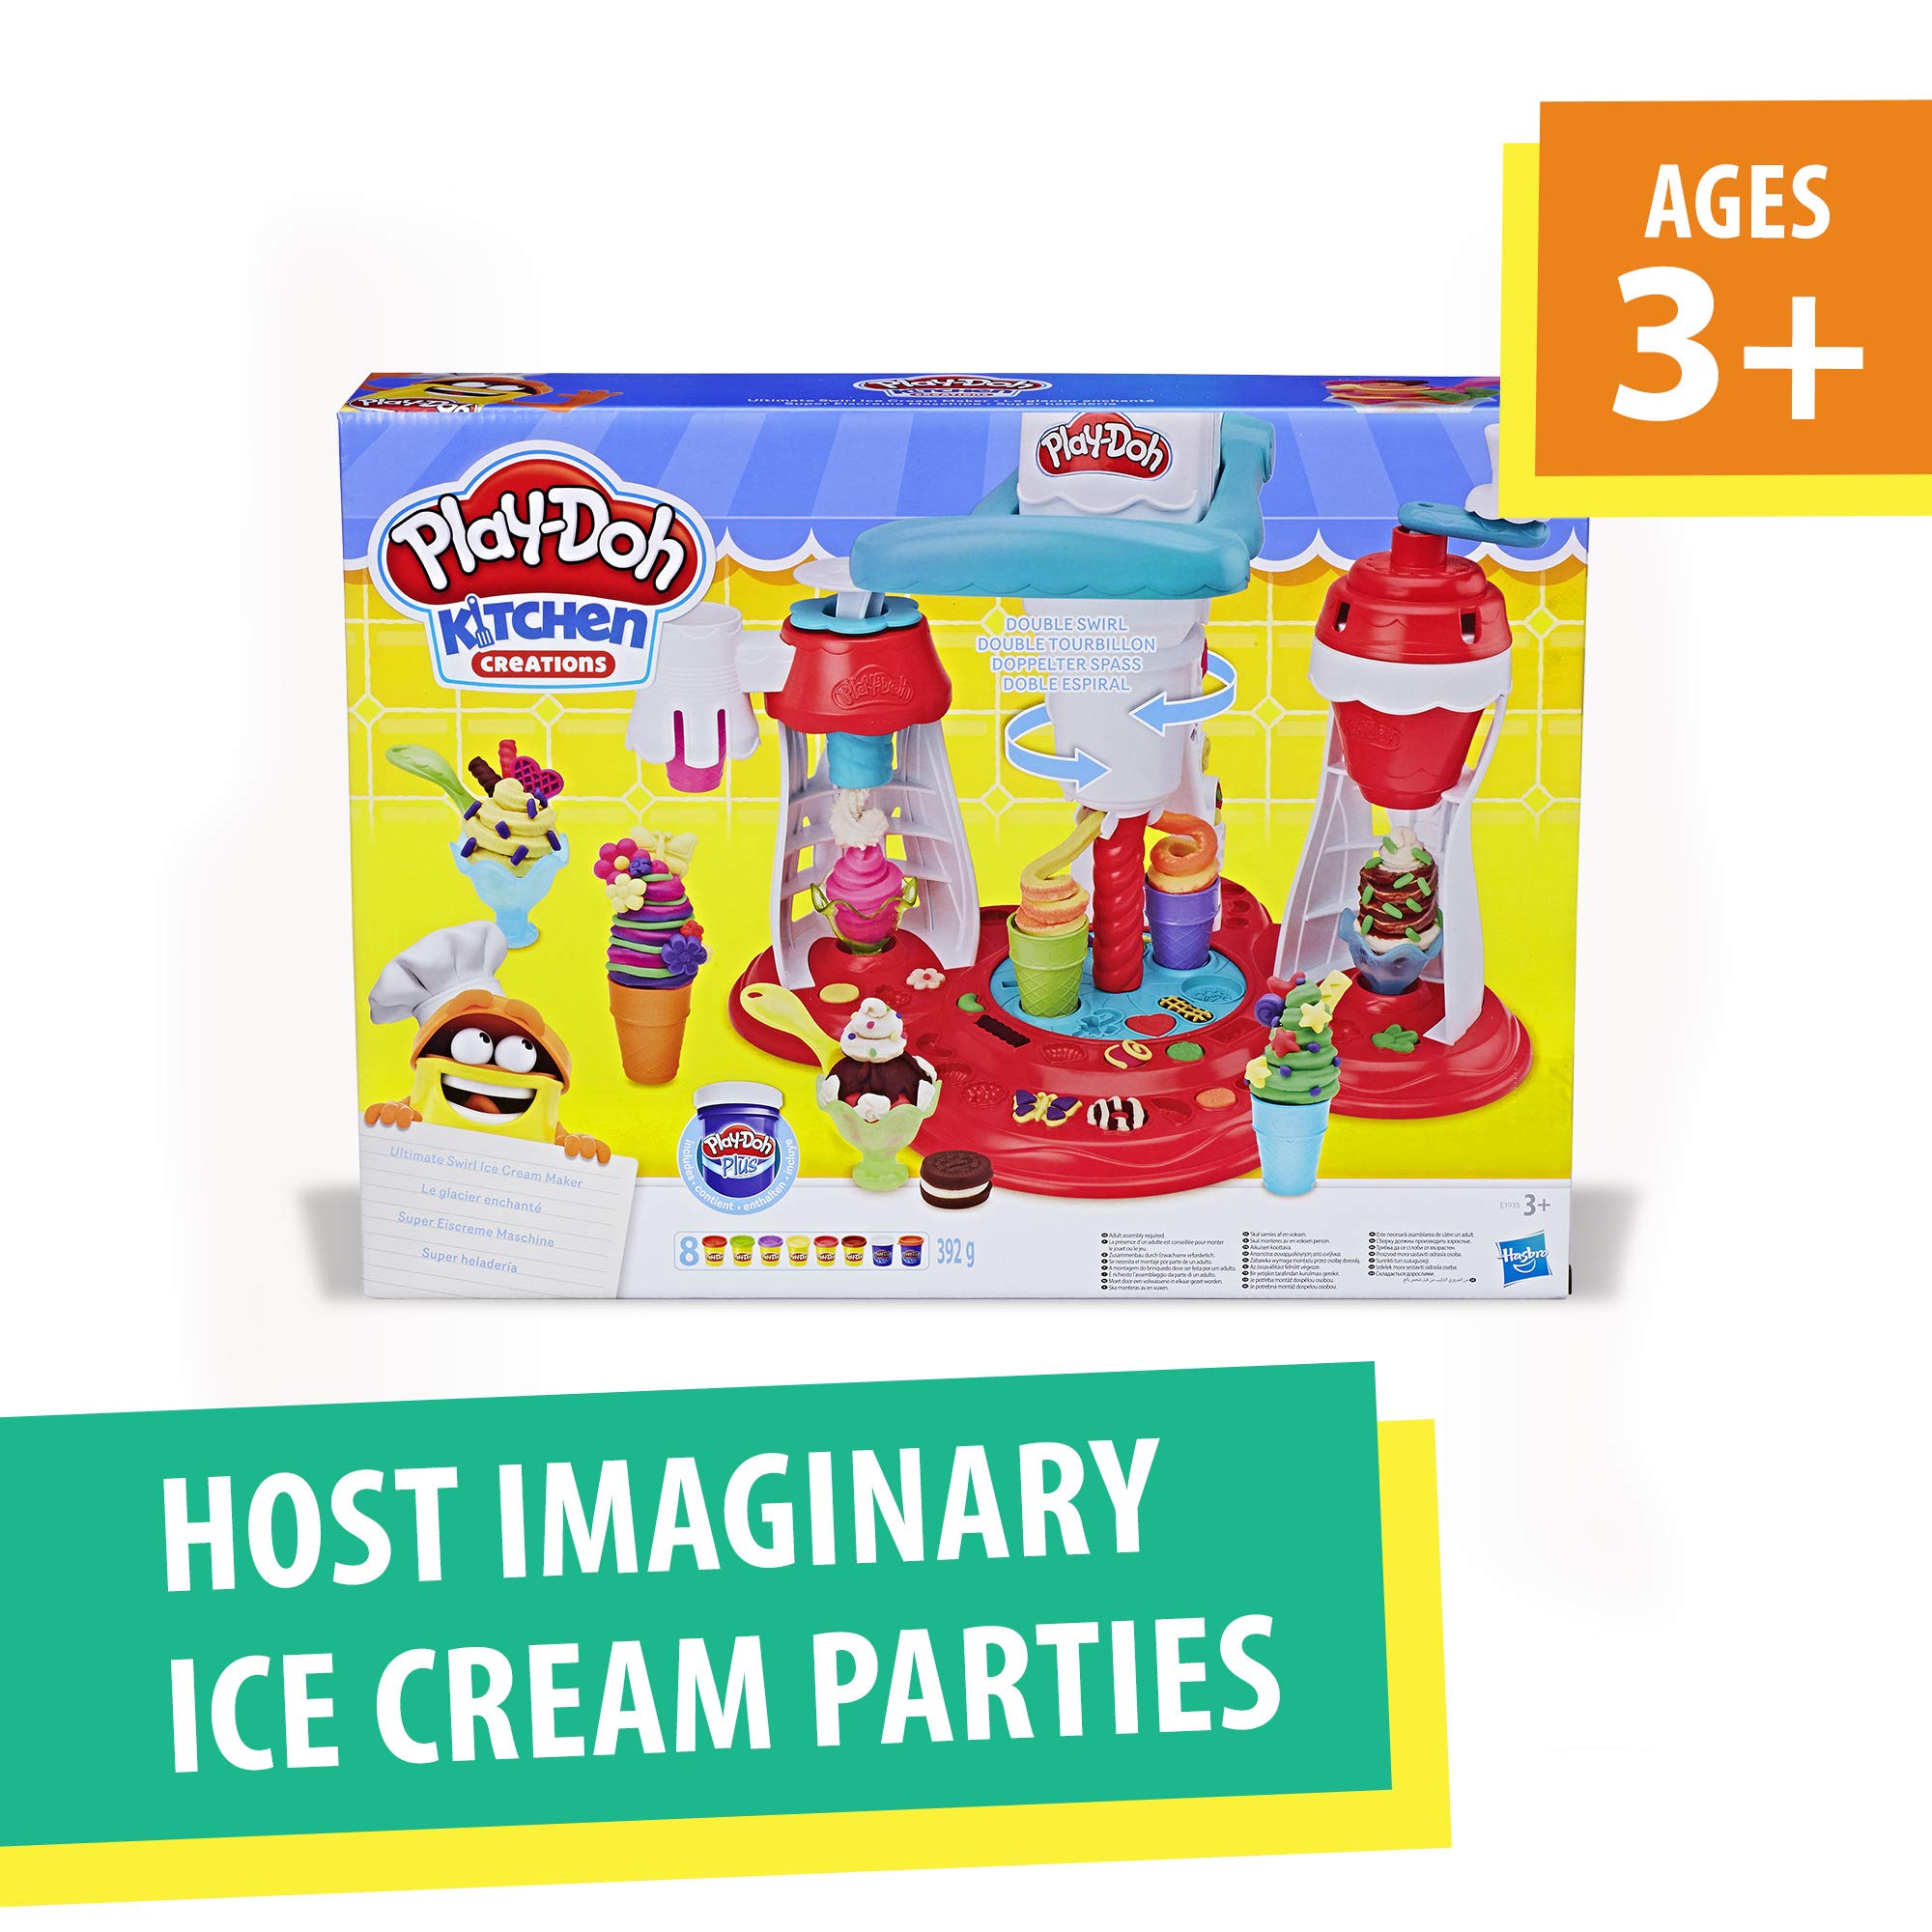 Play-Doh Kitchen Creations Ultimate Swirl Ice Cream Maker Food Set with 8 Cans of Play-Doh - image 2 of 8